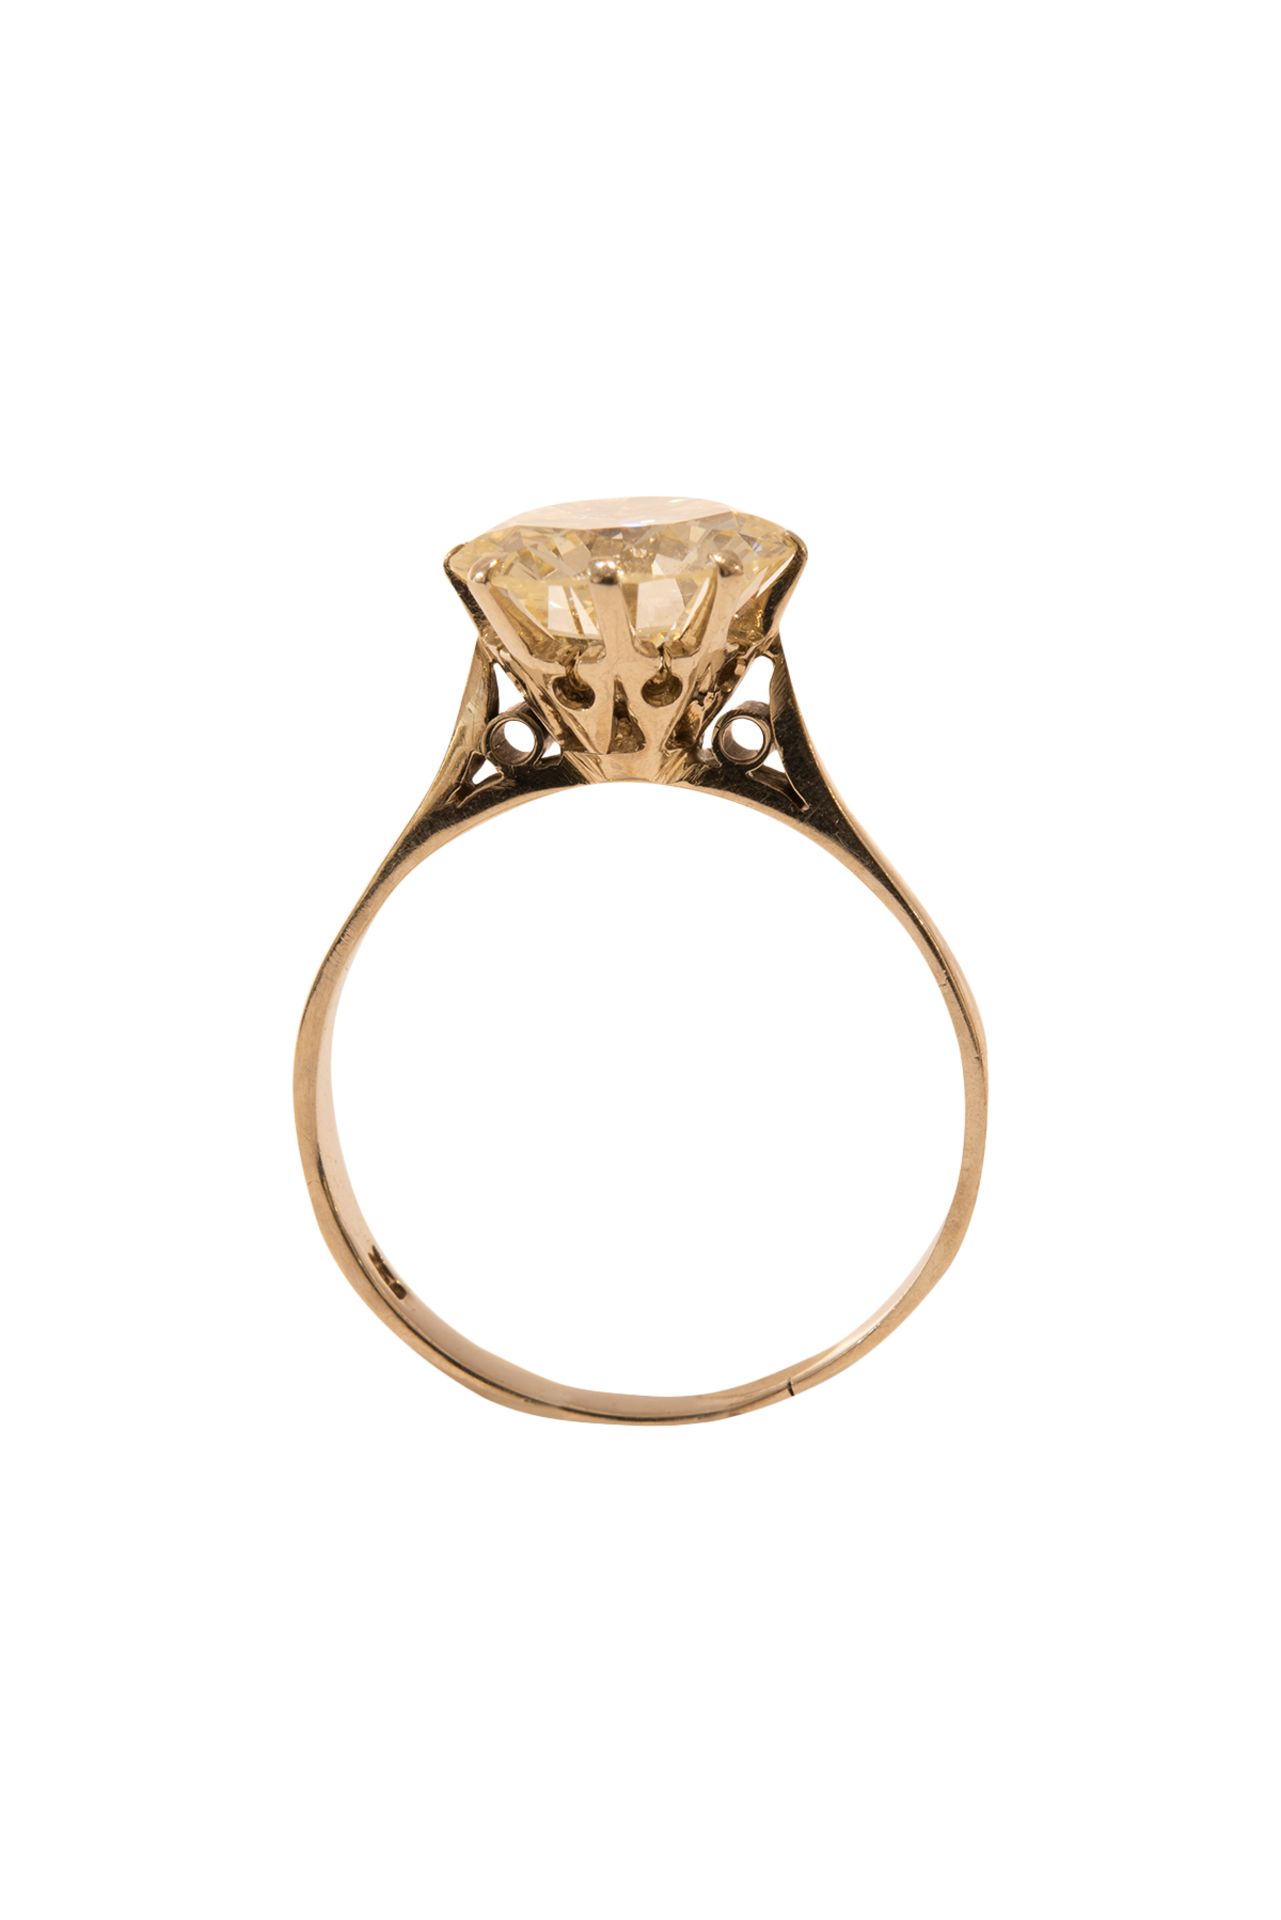 Ring with brilliant diamond - Image 3 of 5